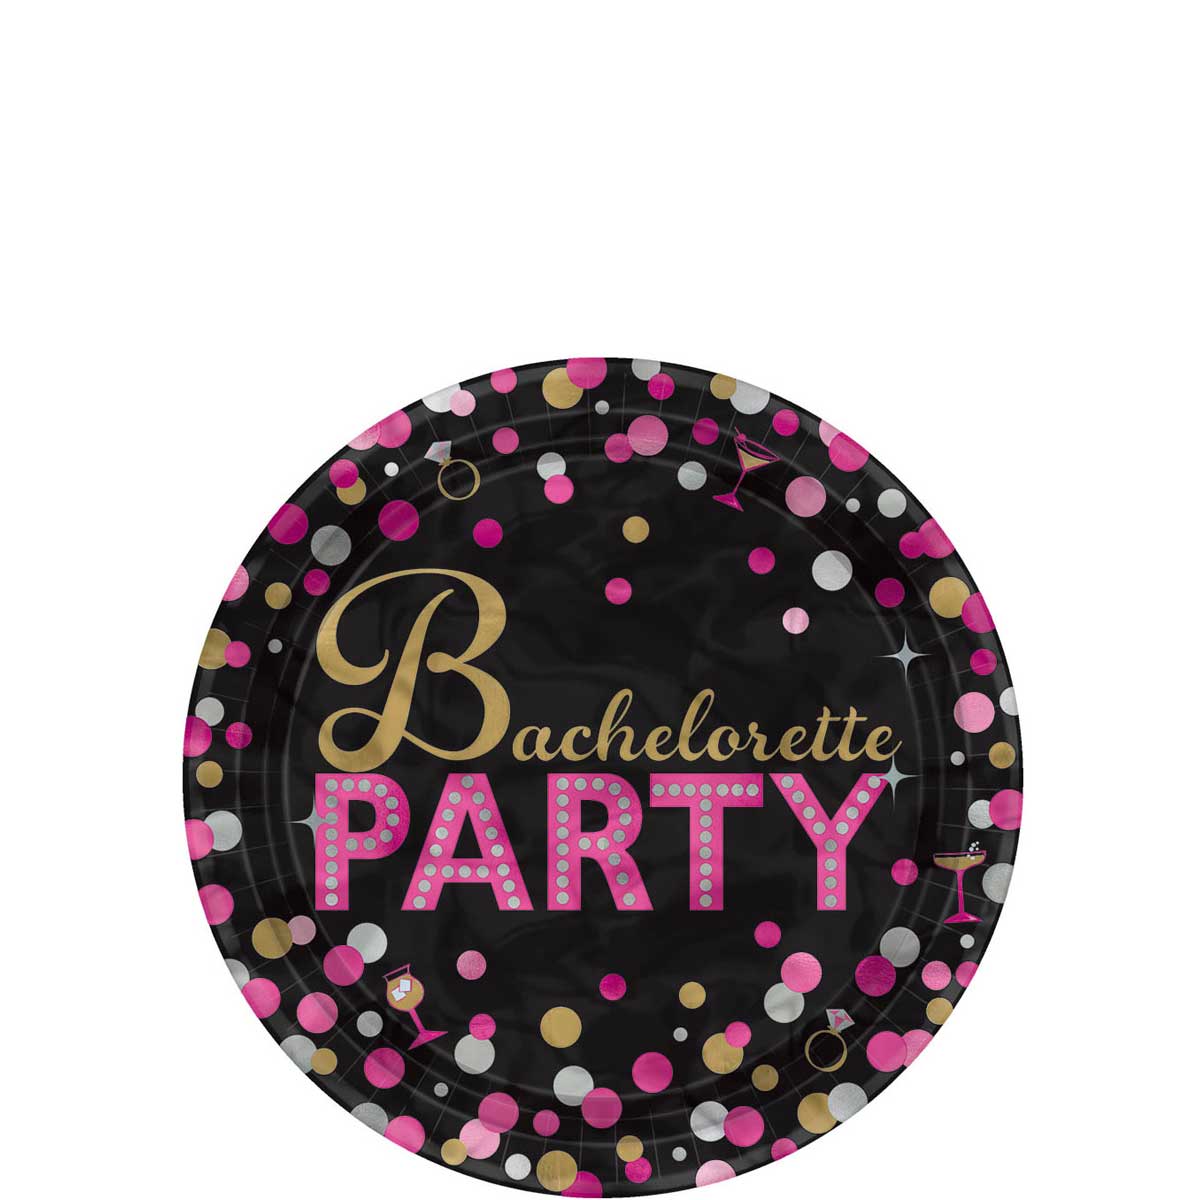 Bachelorette Night Metallic Plates 7in, 8pcs Printed Tableware - Party Centre